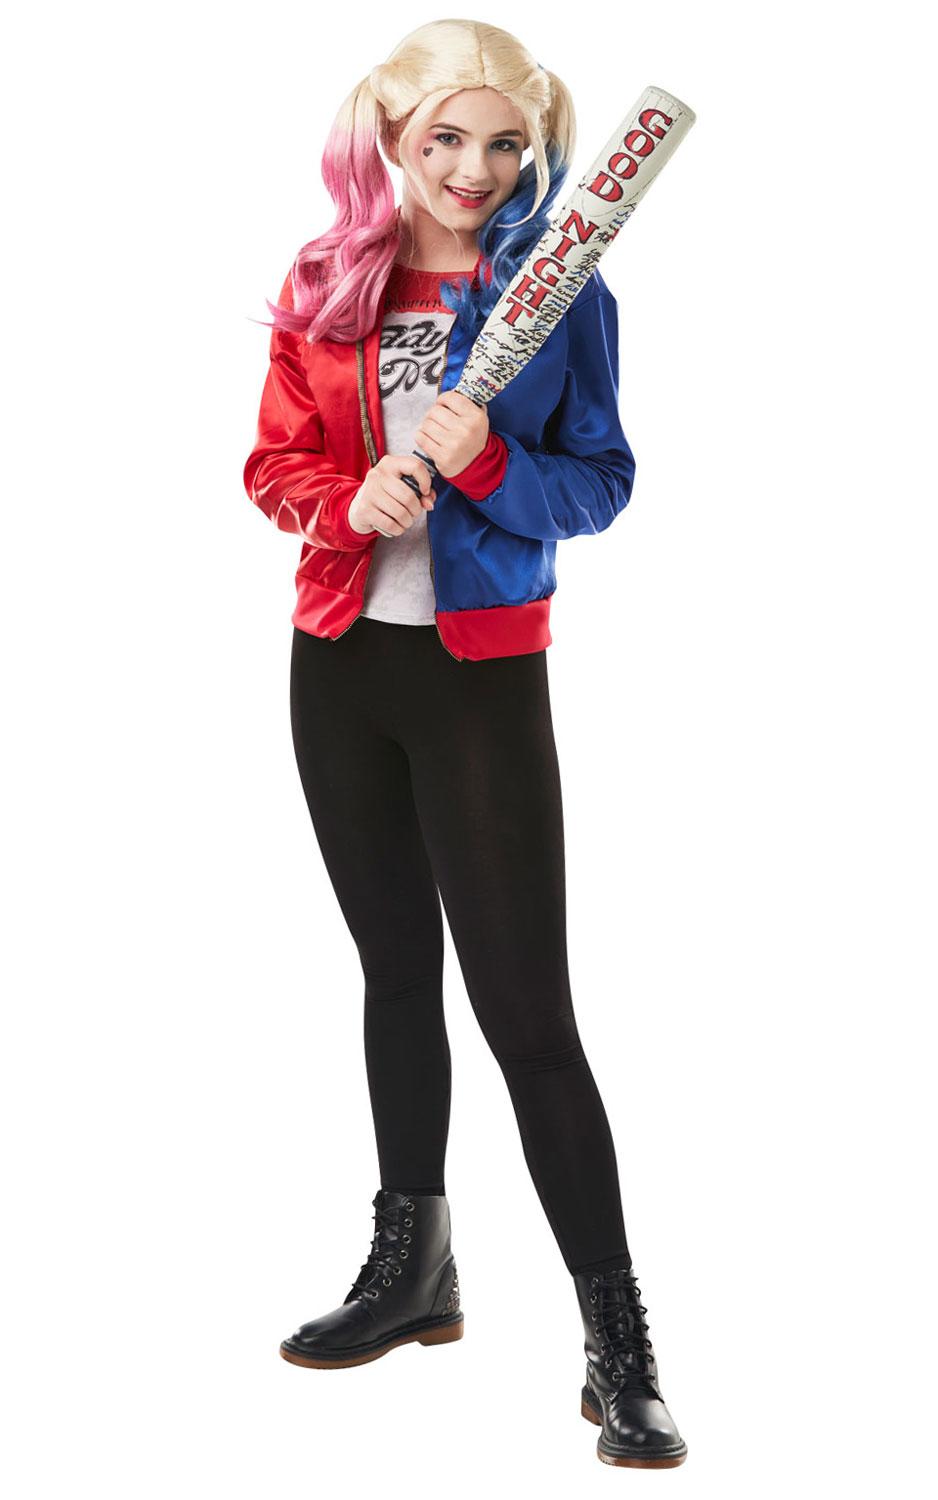 Suicide Squad Harley Quinn Costume Kit - TEENAGE size by Rubies 680009 available here at Karnival Costumes online party shop